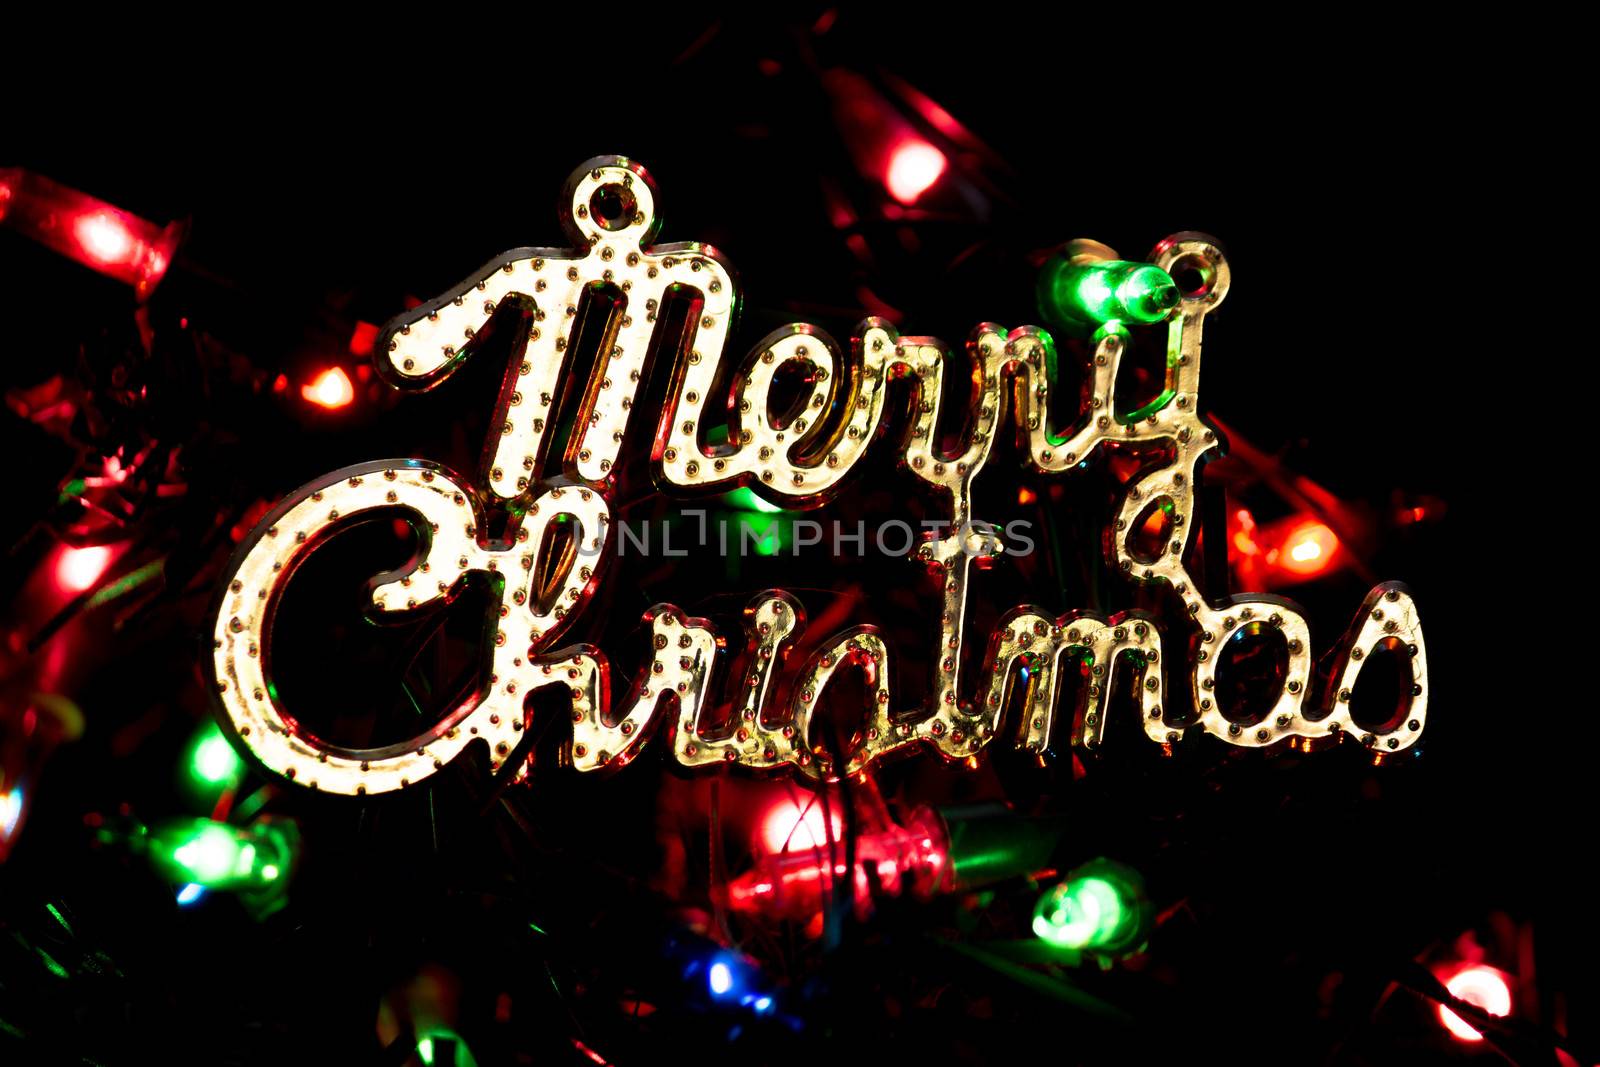 Merry Christmas on dark background with lights bokeh sparkle background presents for new year. by TEERASAK